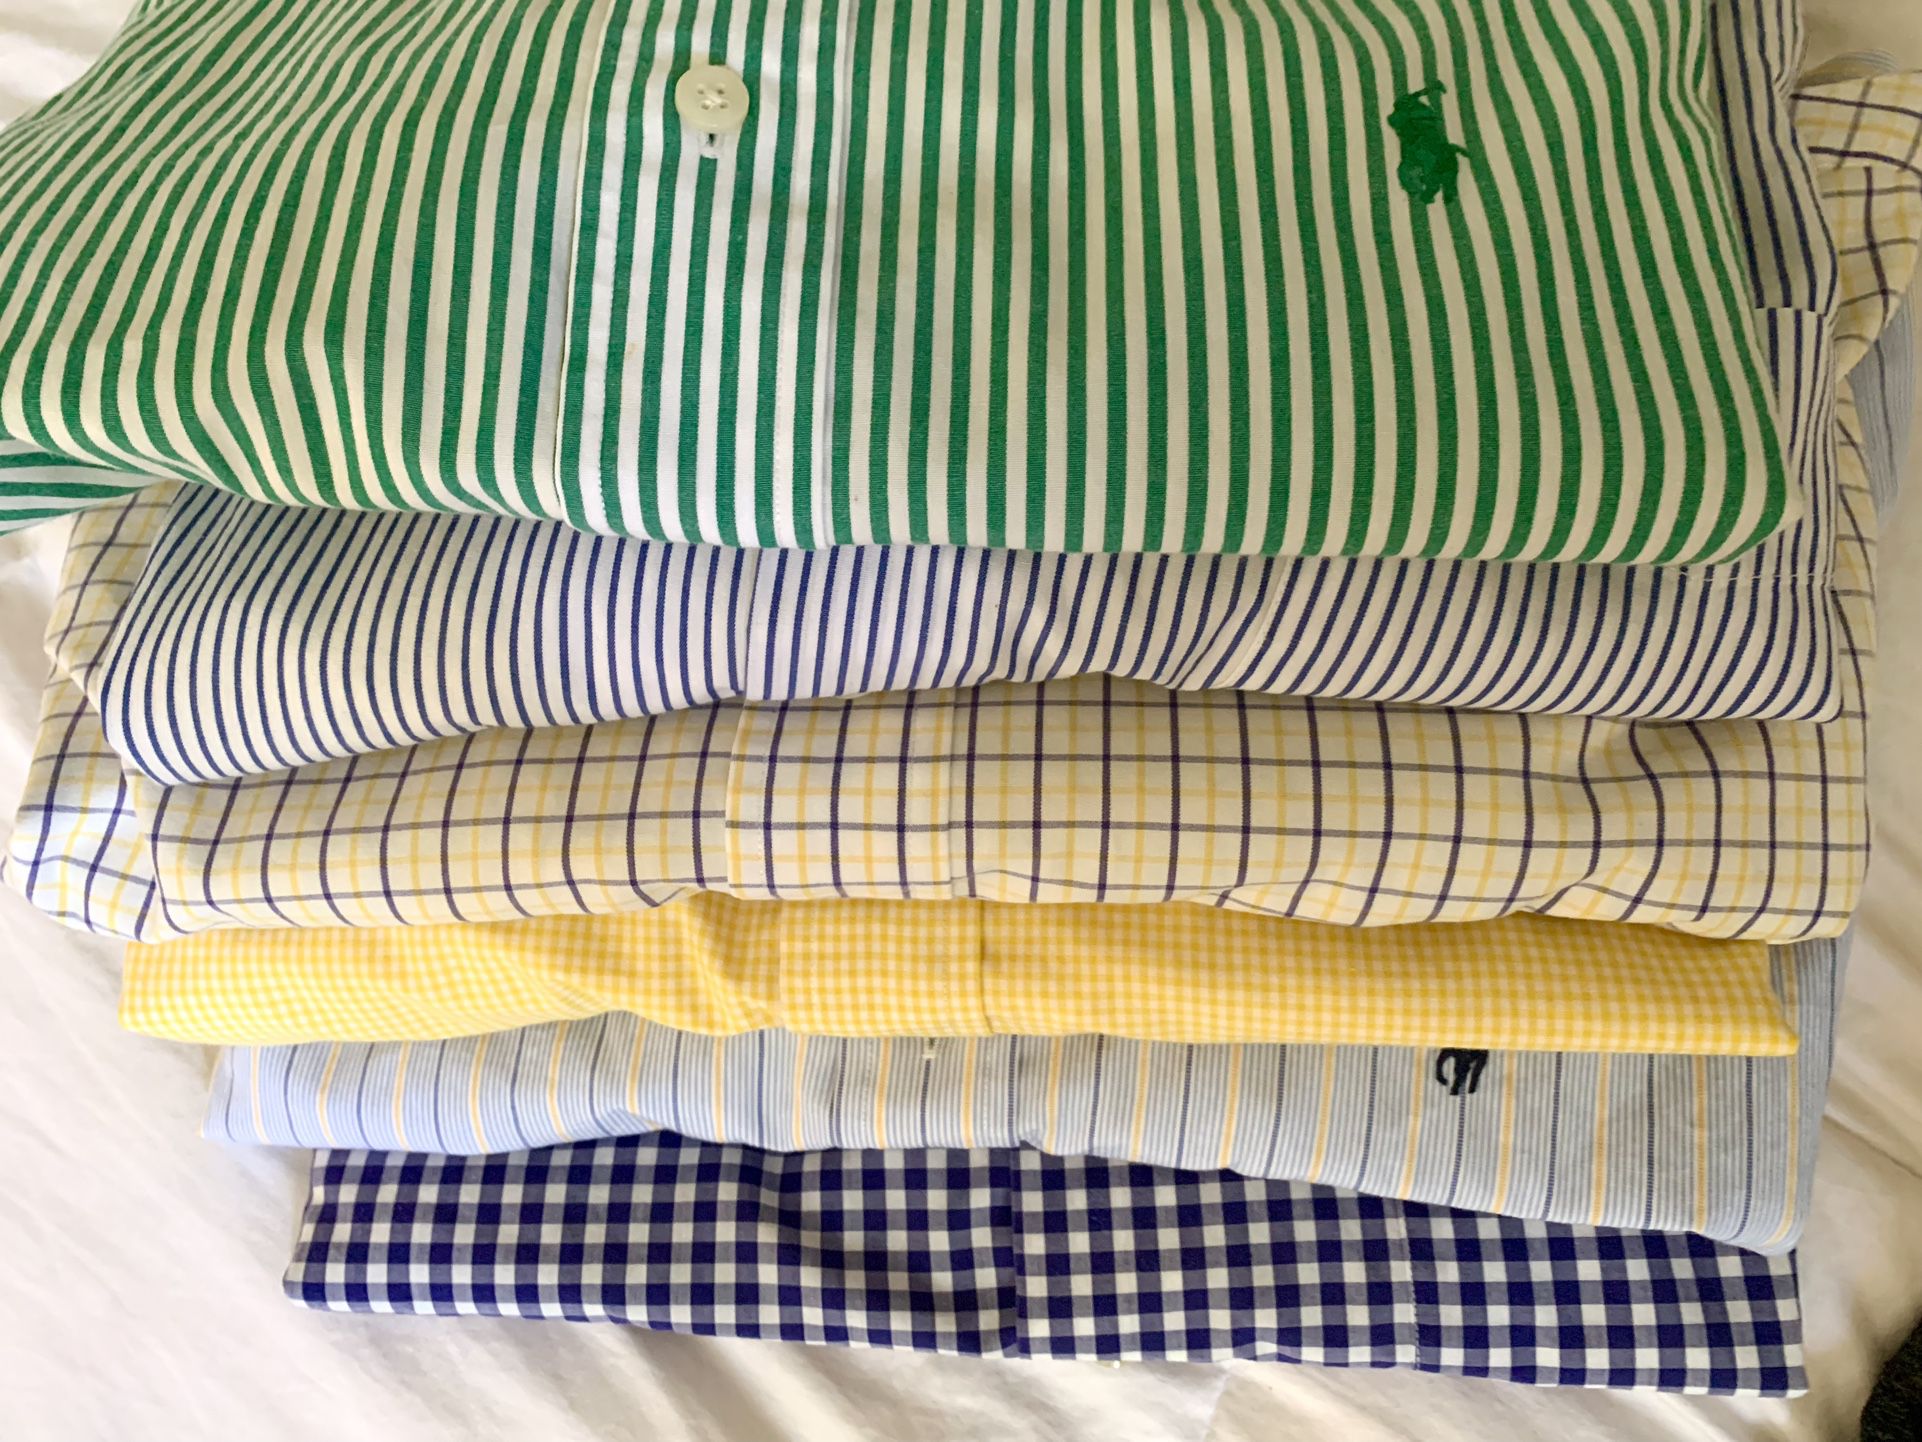 Ralph lauren Shirts  Size “L”.   Each $35.  Perfect Condition KENDALL AREA PICK UP 